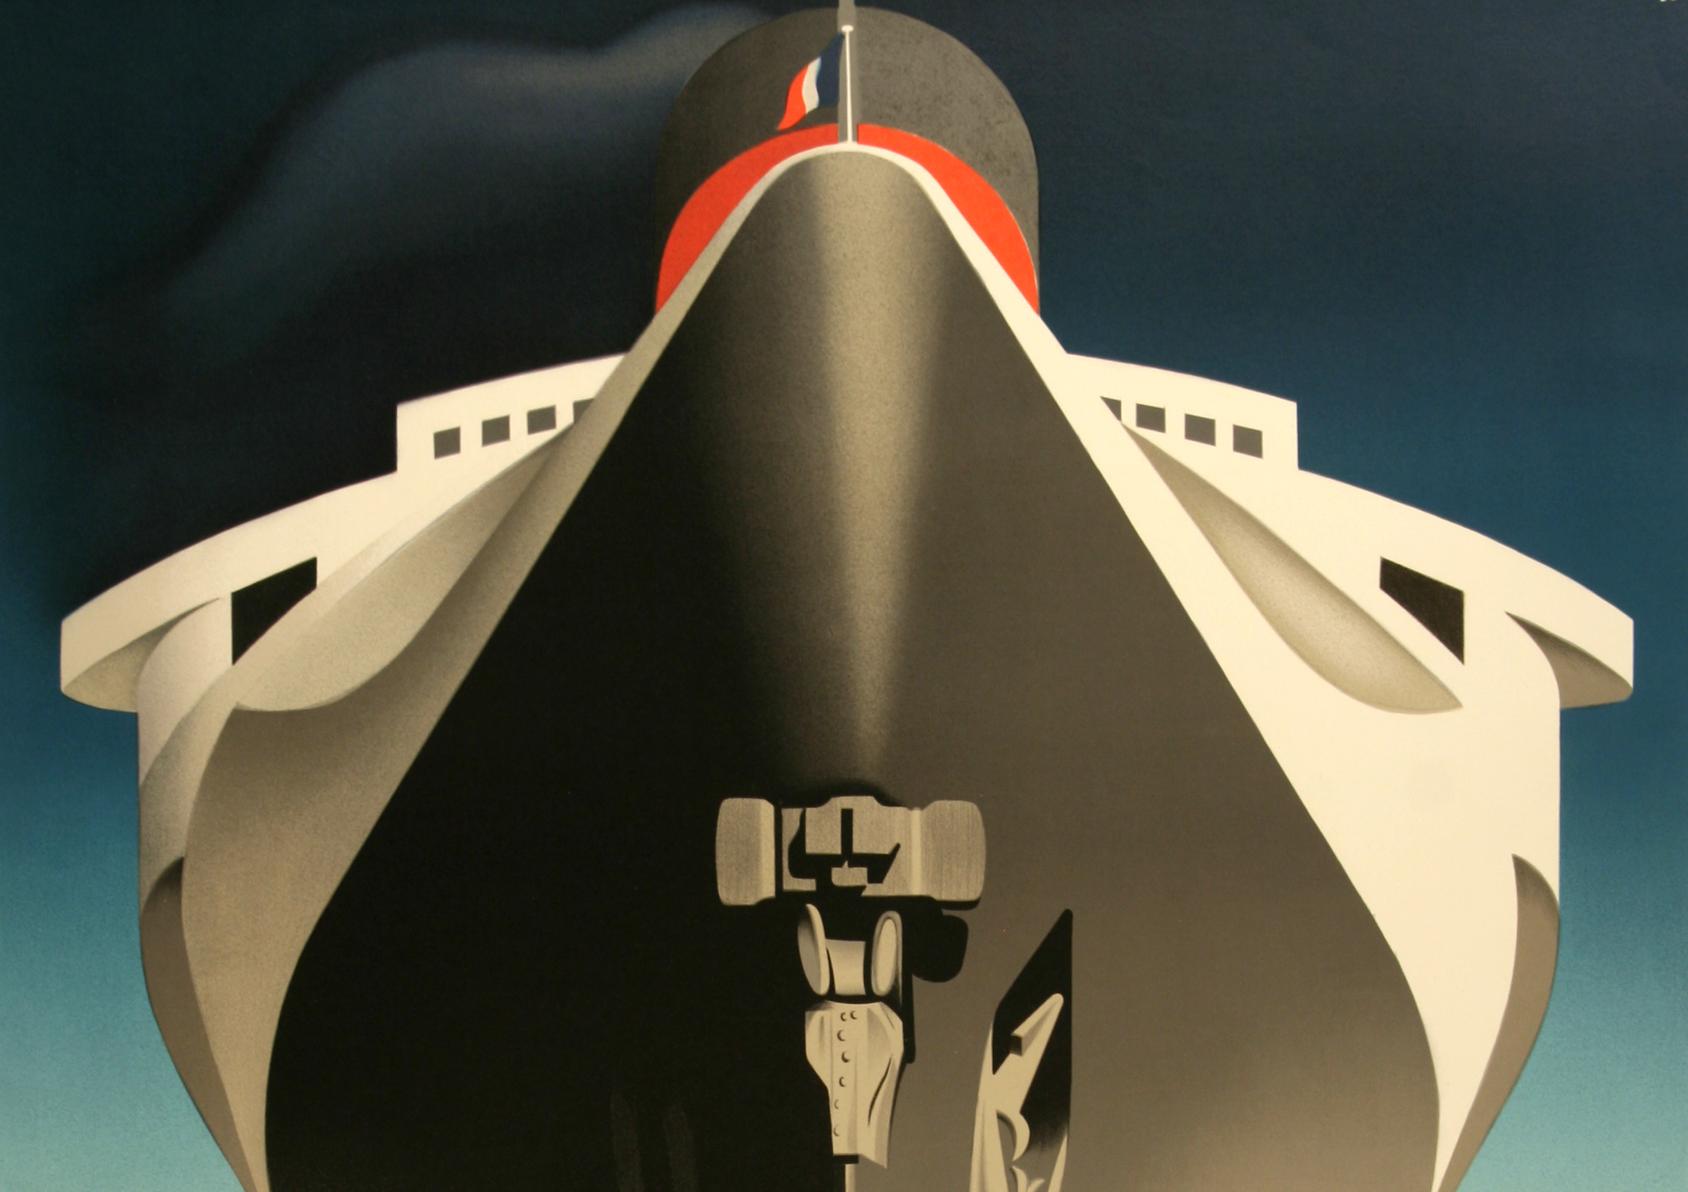 Mumm Champagne Poster for 1983 America's Cup Races – The Ross Art